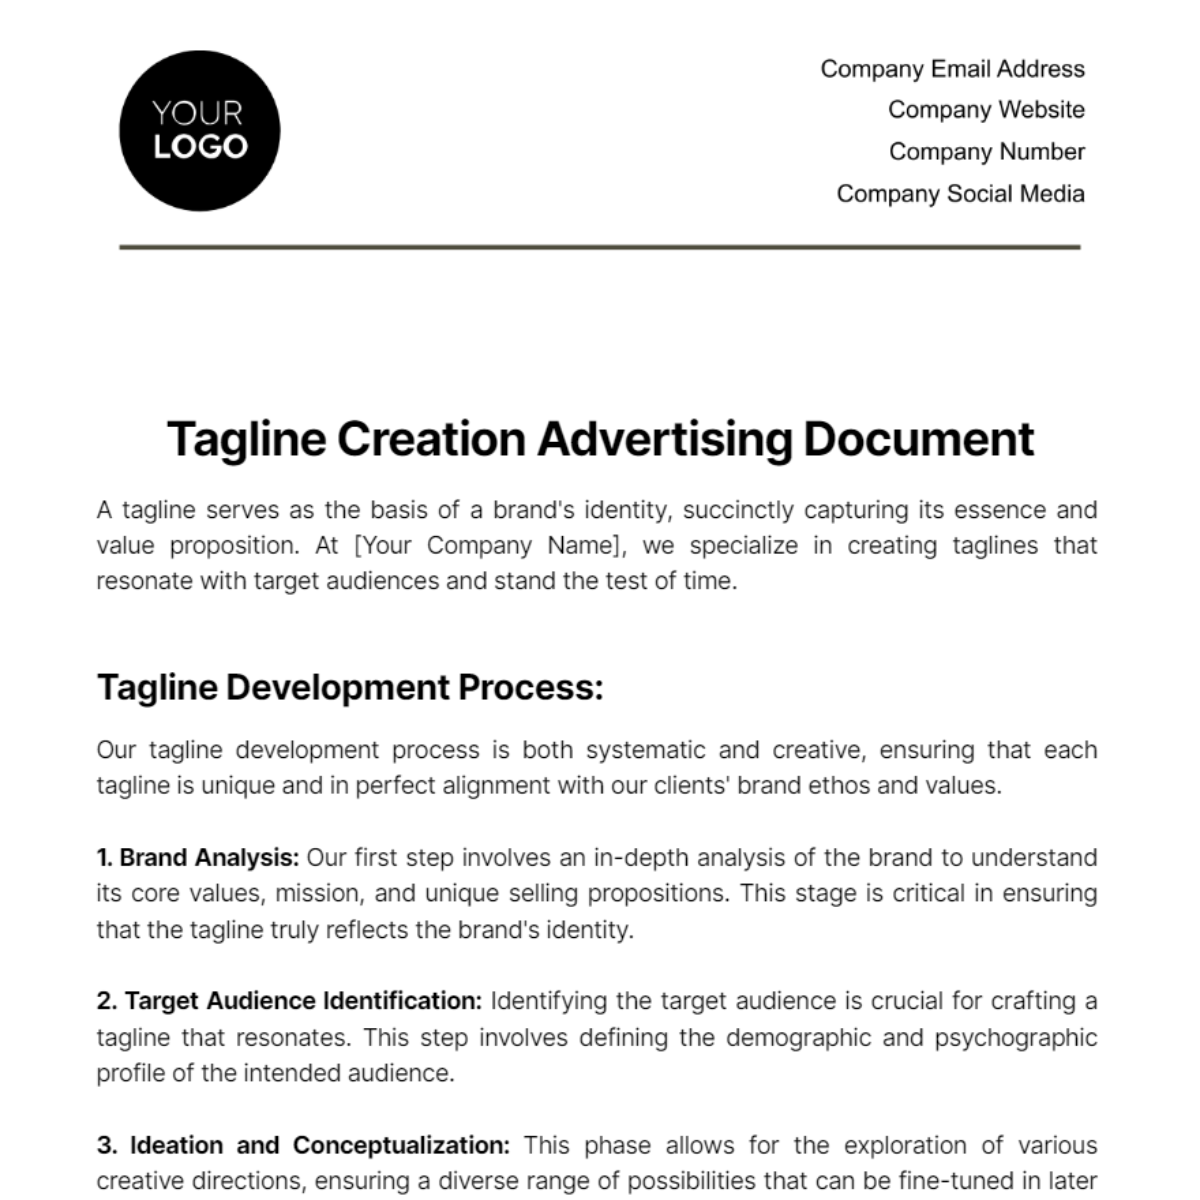 Tagline Creation Advertising Document Template